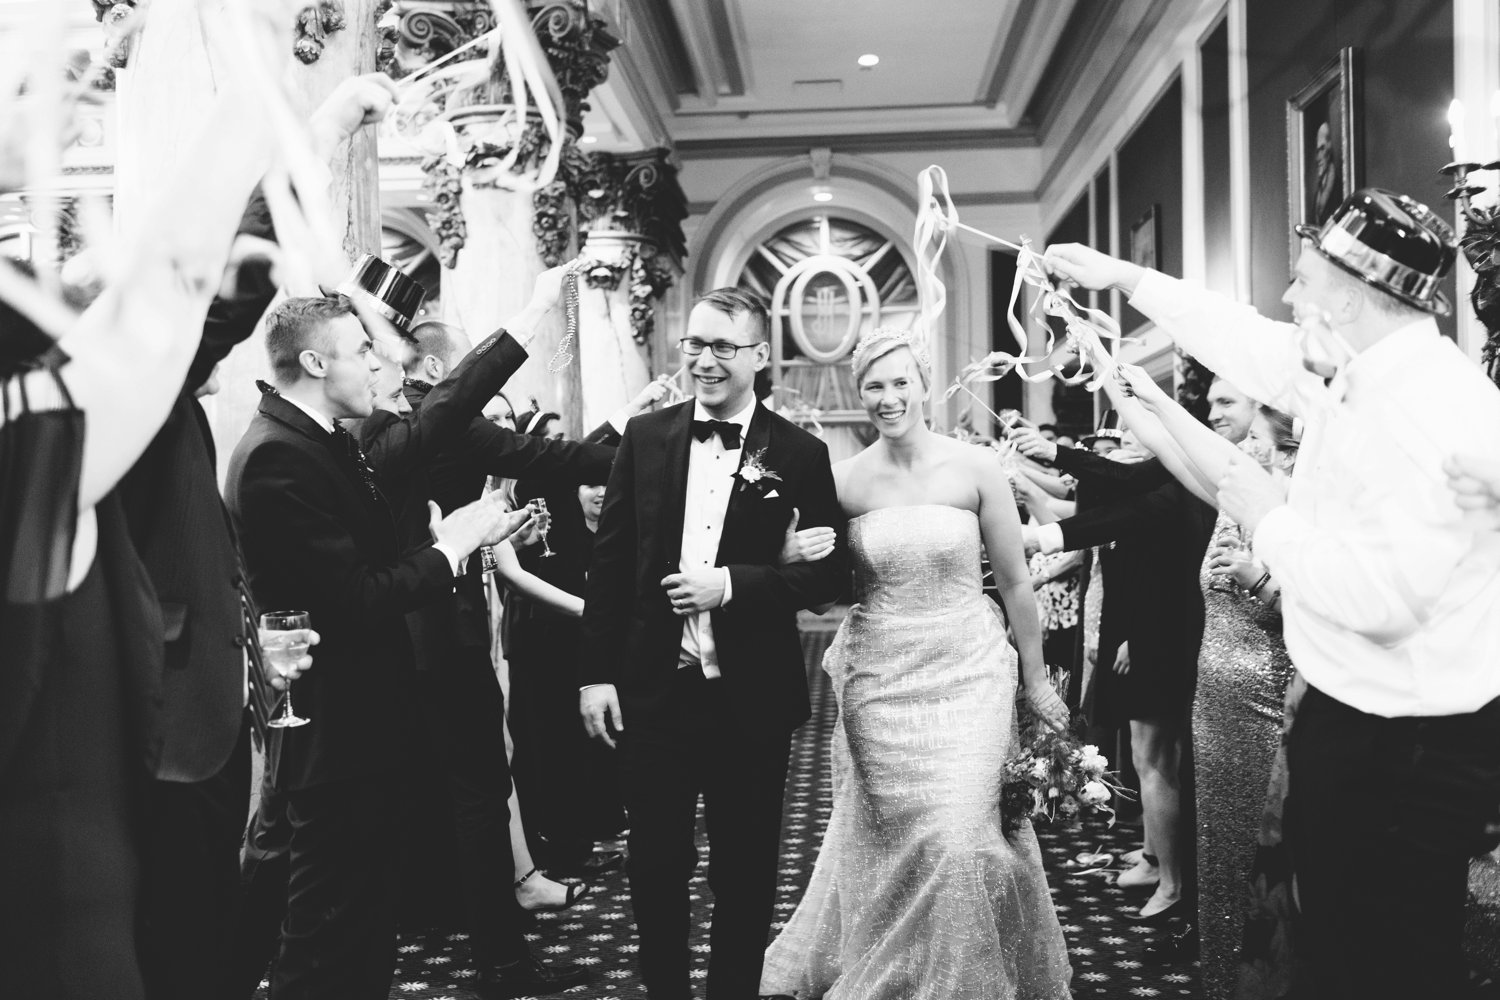 New Year's Eve wedding at The Jefferson Hotel